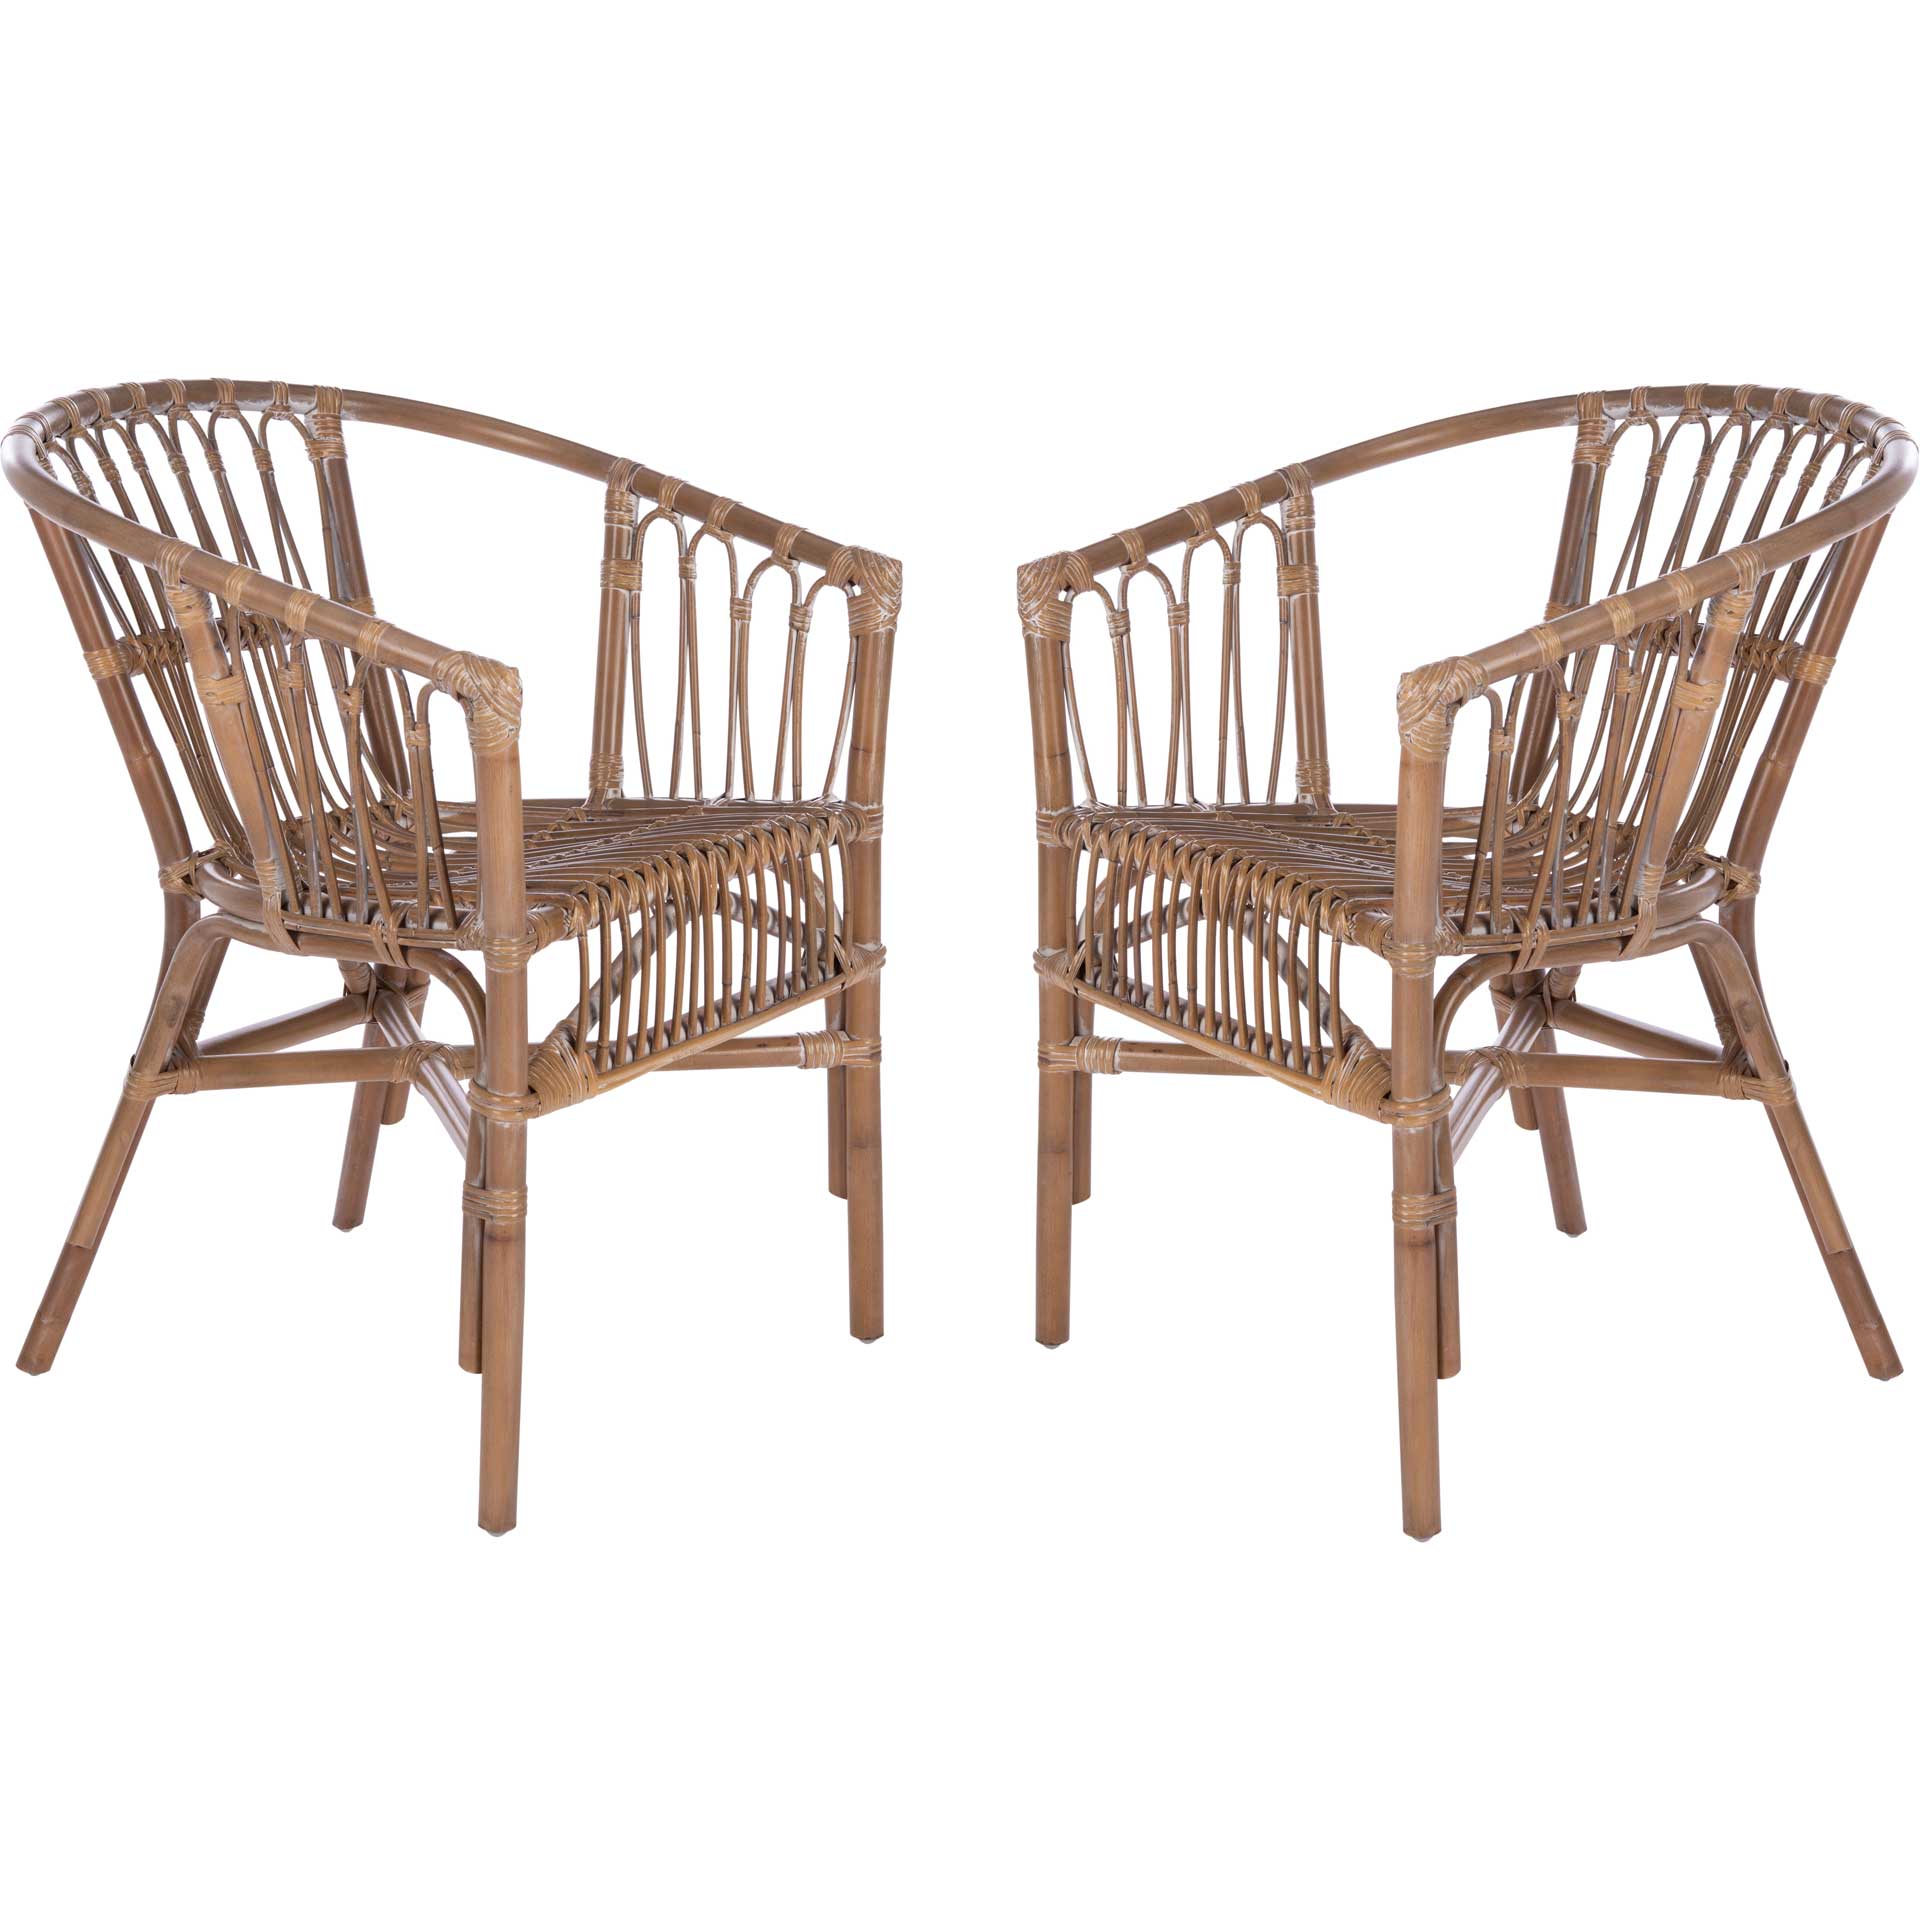 Adhara Rattan Accent Chair Gray White Wash (Set of 2)